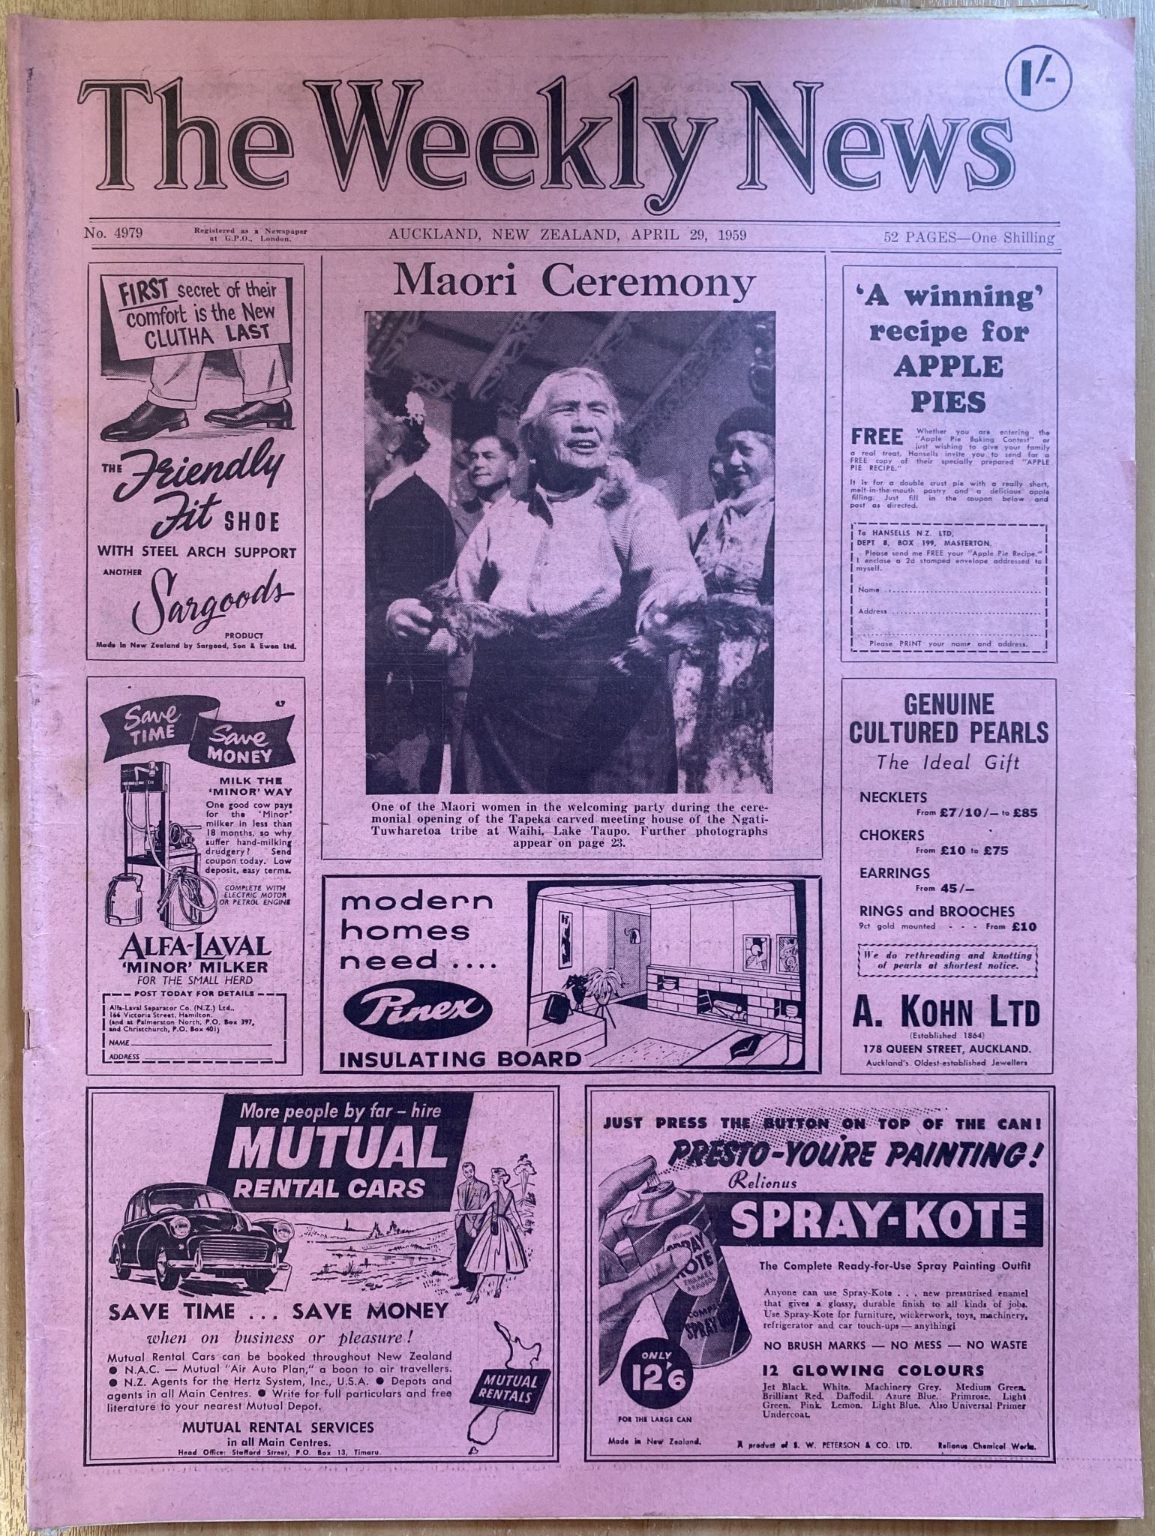 OLD NEWSPAPER: The Weekly News - No. 4979, 29 April 1959